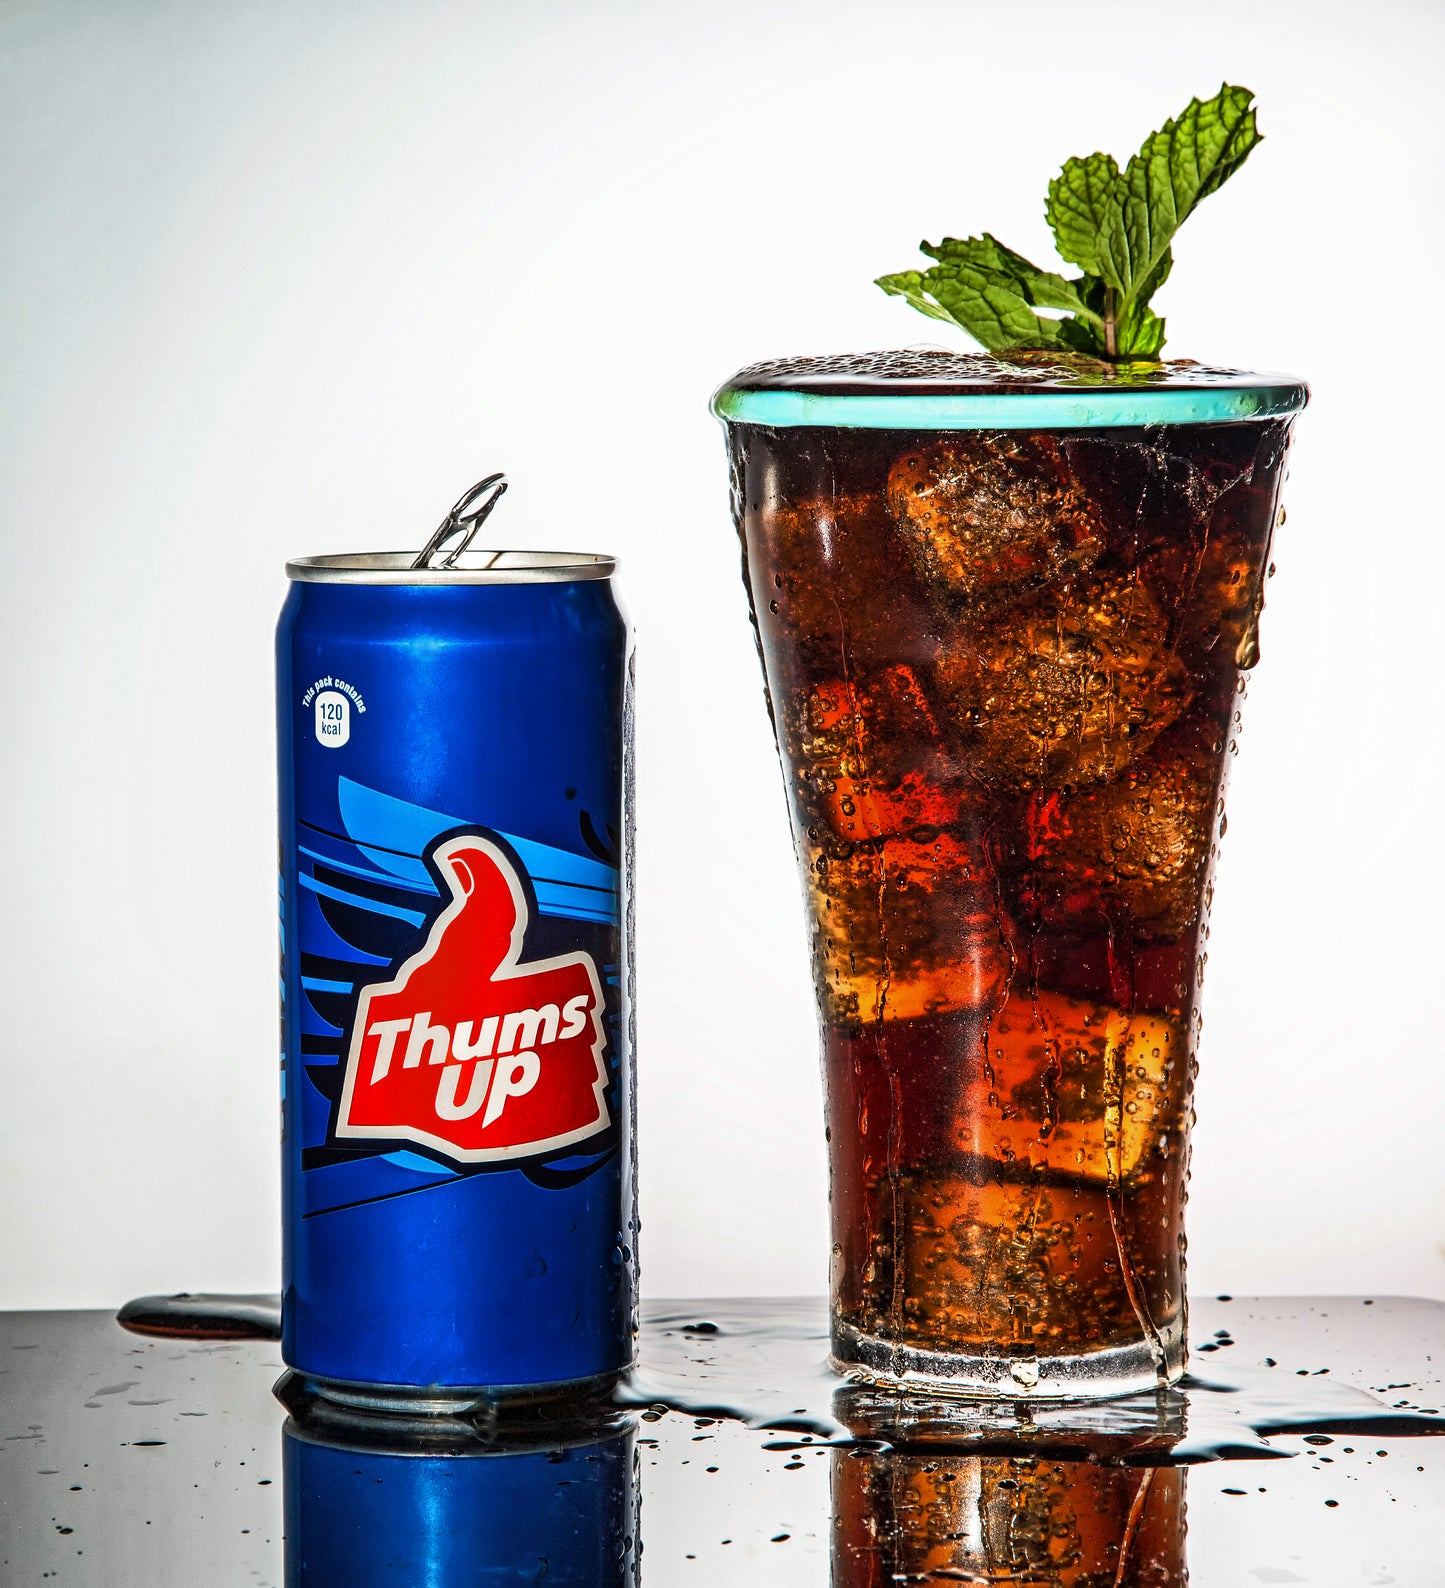 ThumsUp - Indian Soda